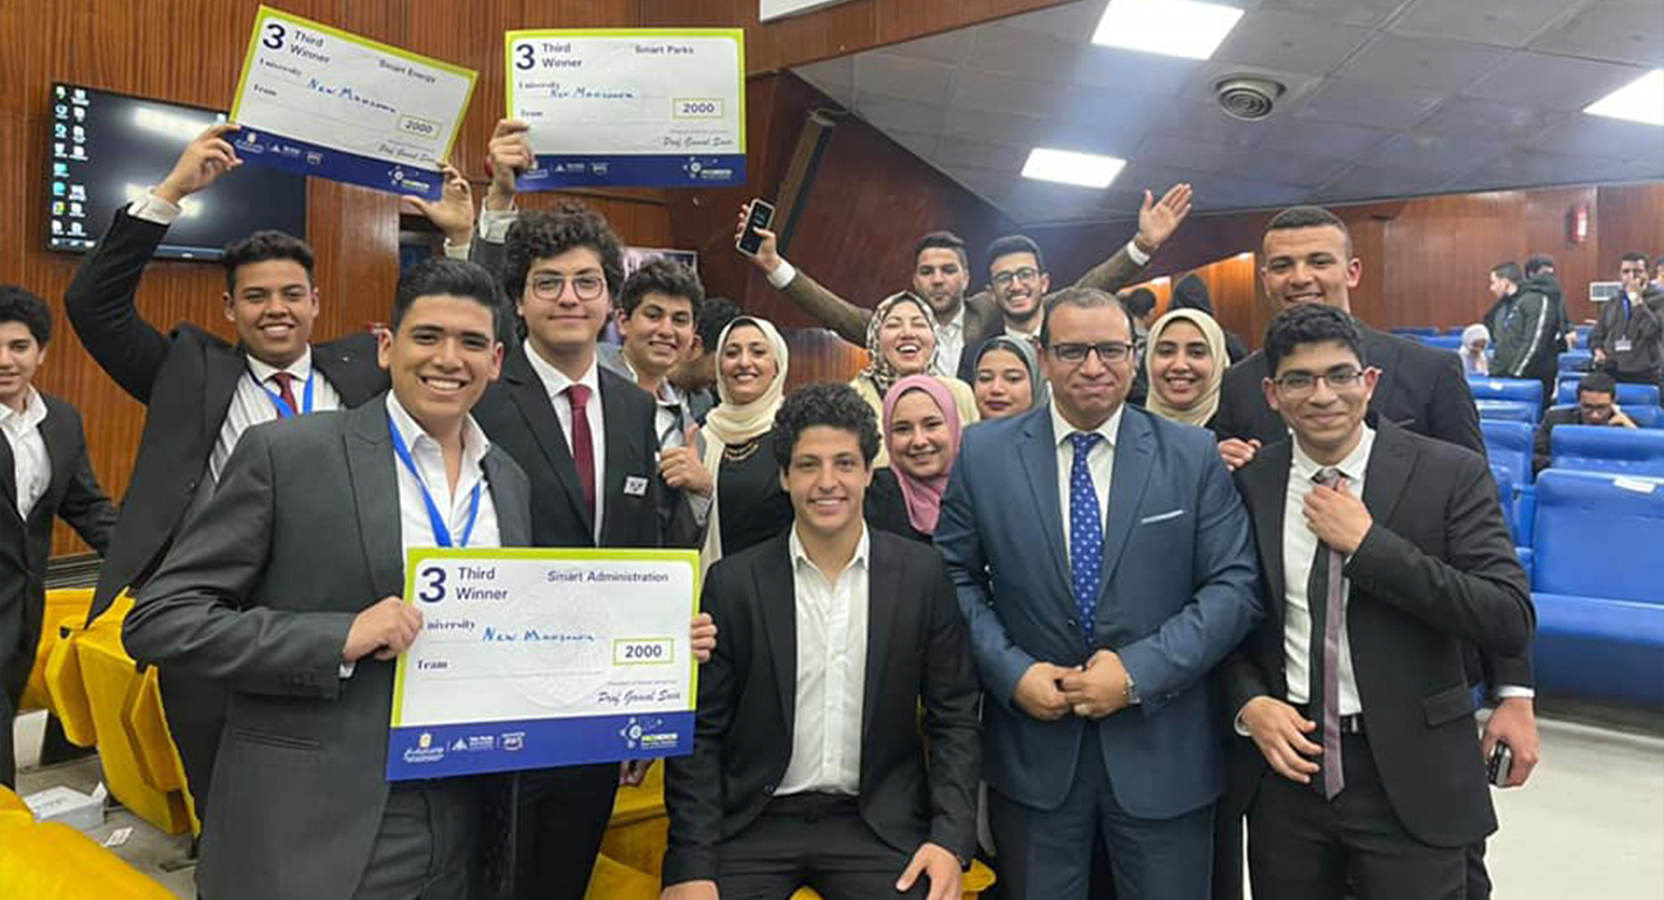 New Mansoura Architecture wins awards in smart cities hackathon competitions